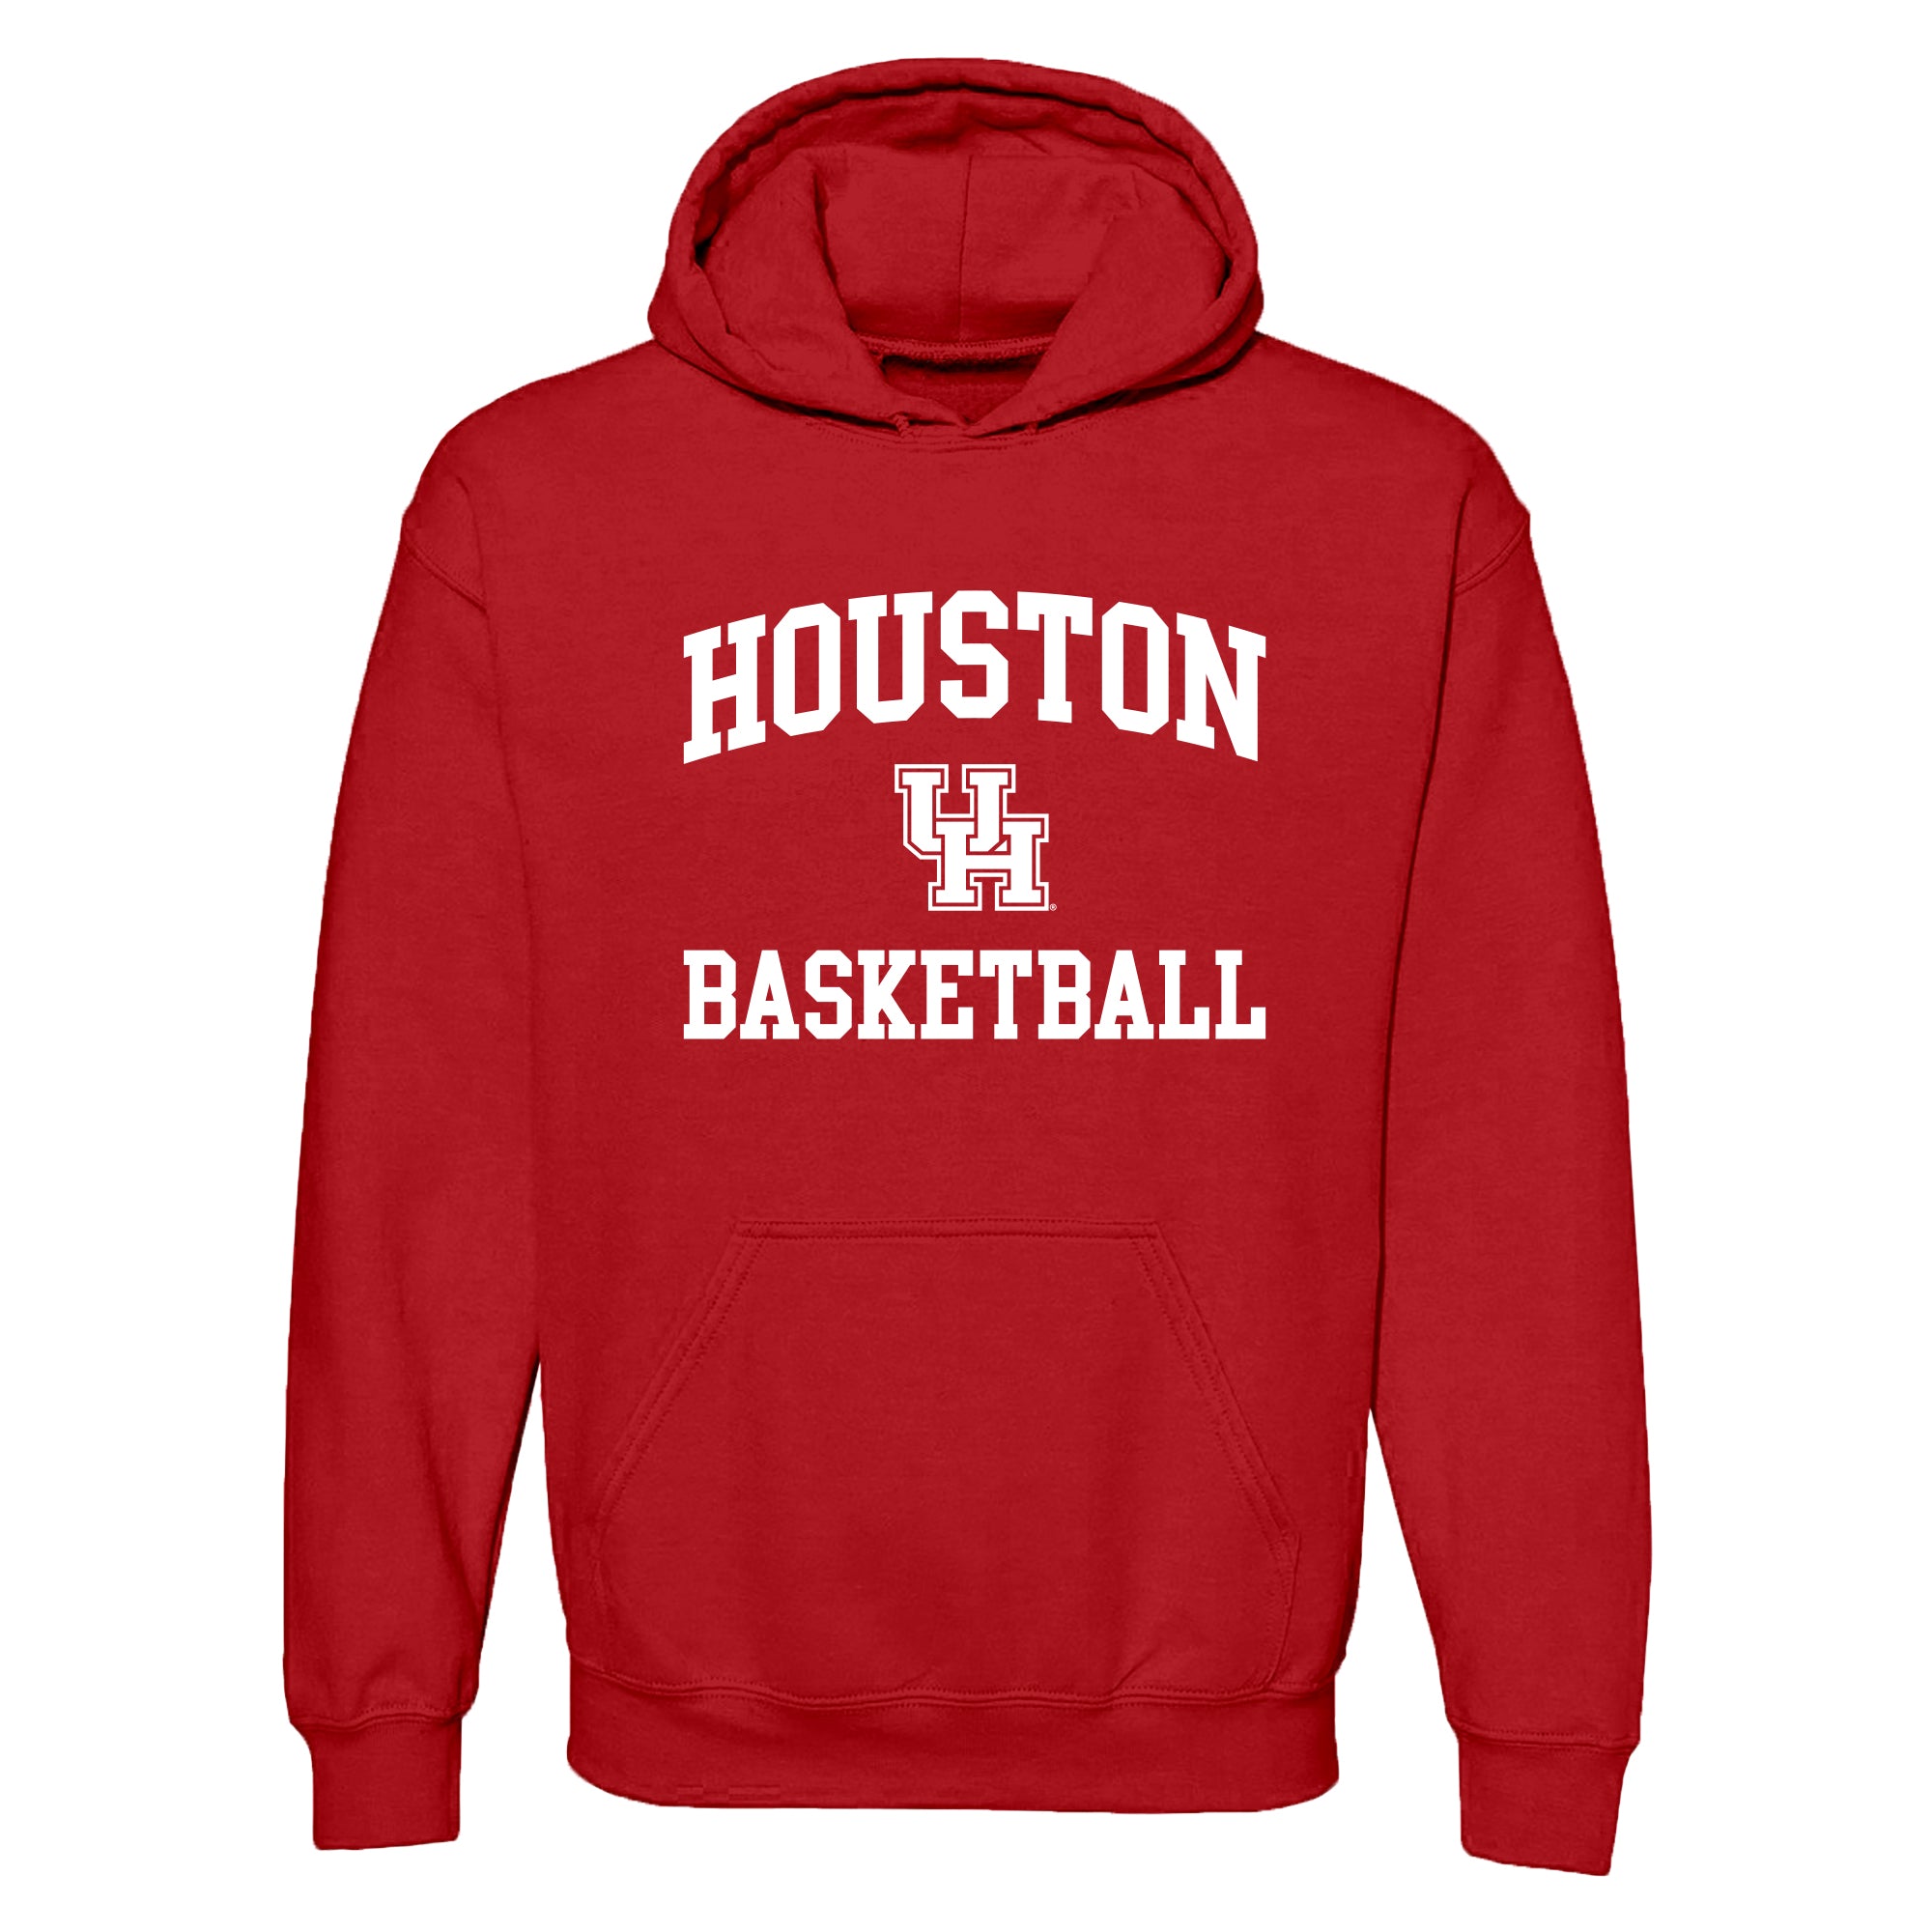 Time to Gear Up for 2023-2024 Basketball (and winter and holidays) -  Cougar Basketball - Coogfans